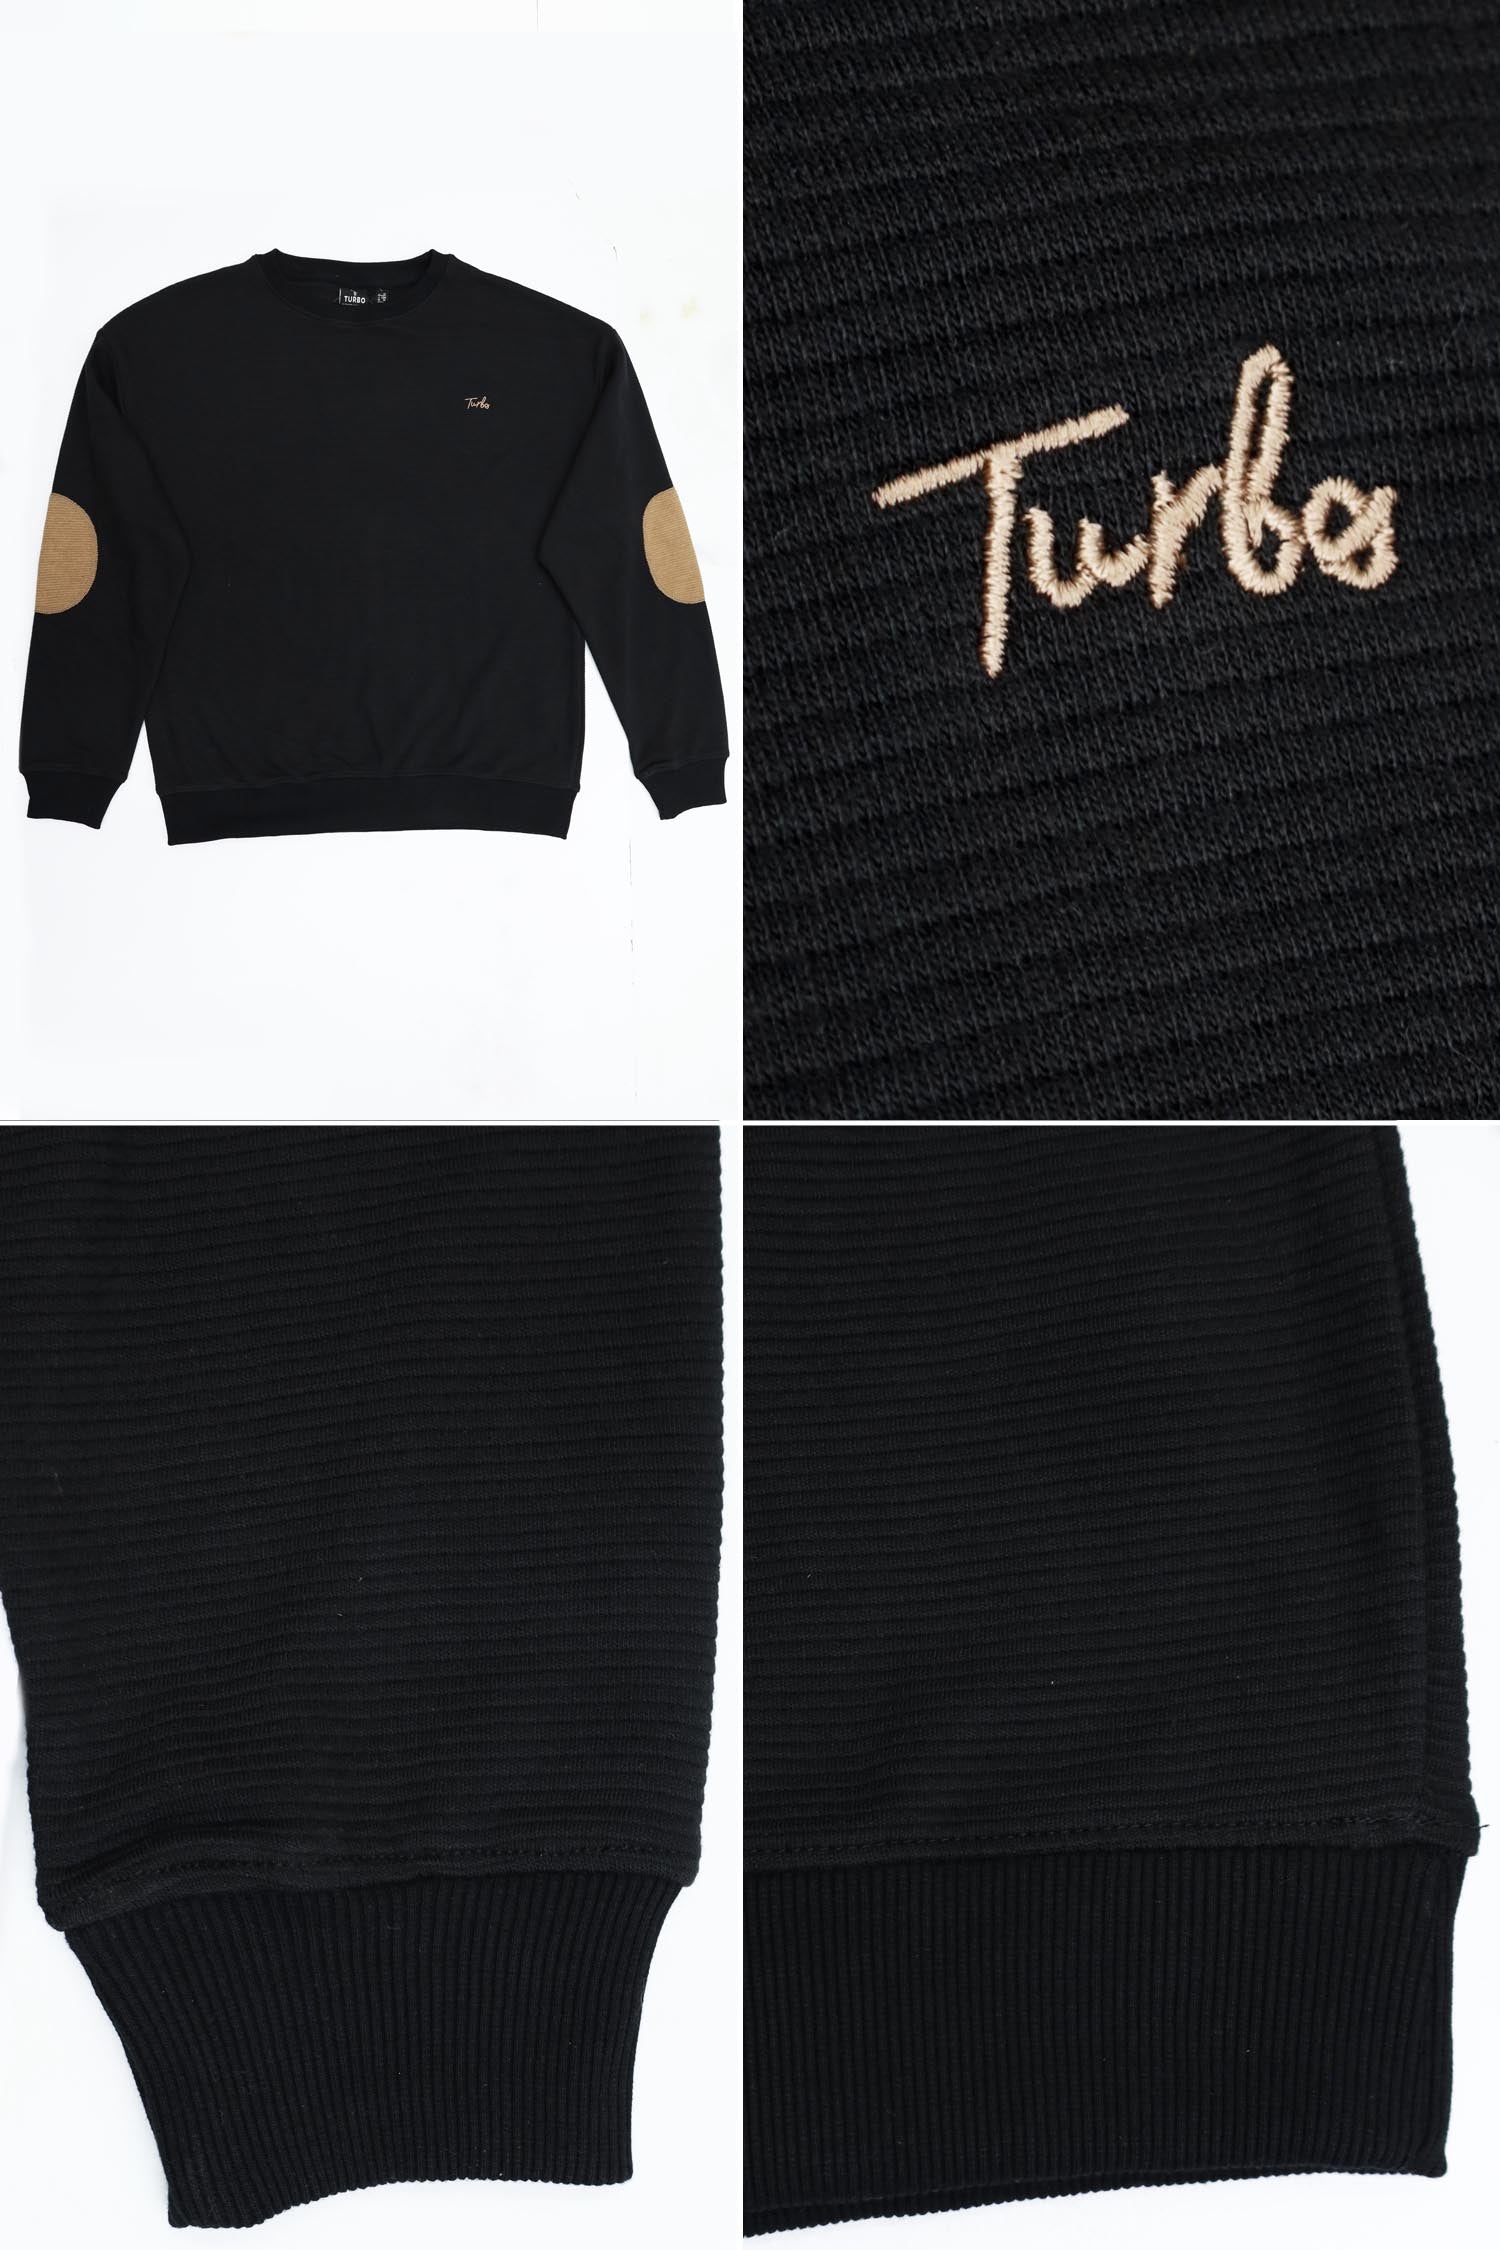 Turbo Embroided Men's Over Size Sweatshirt